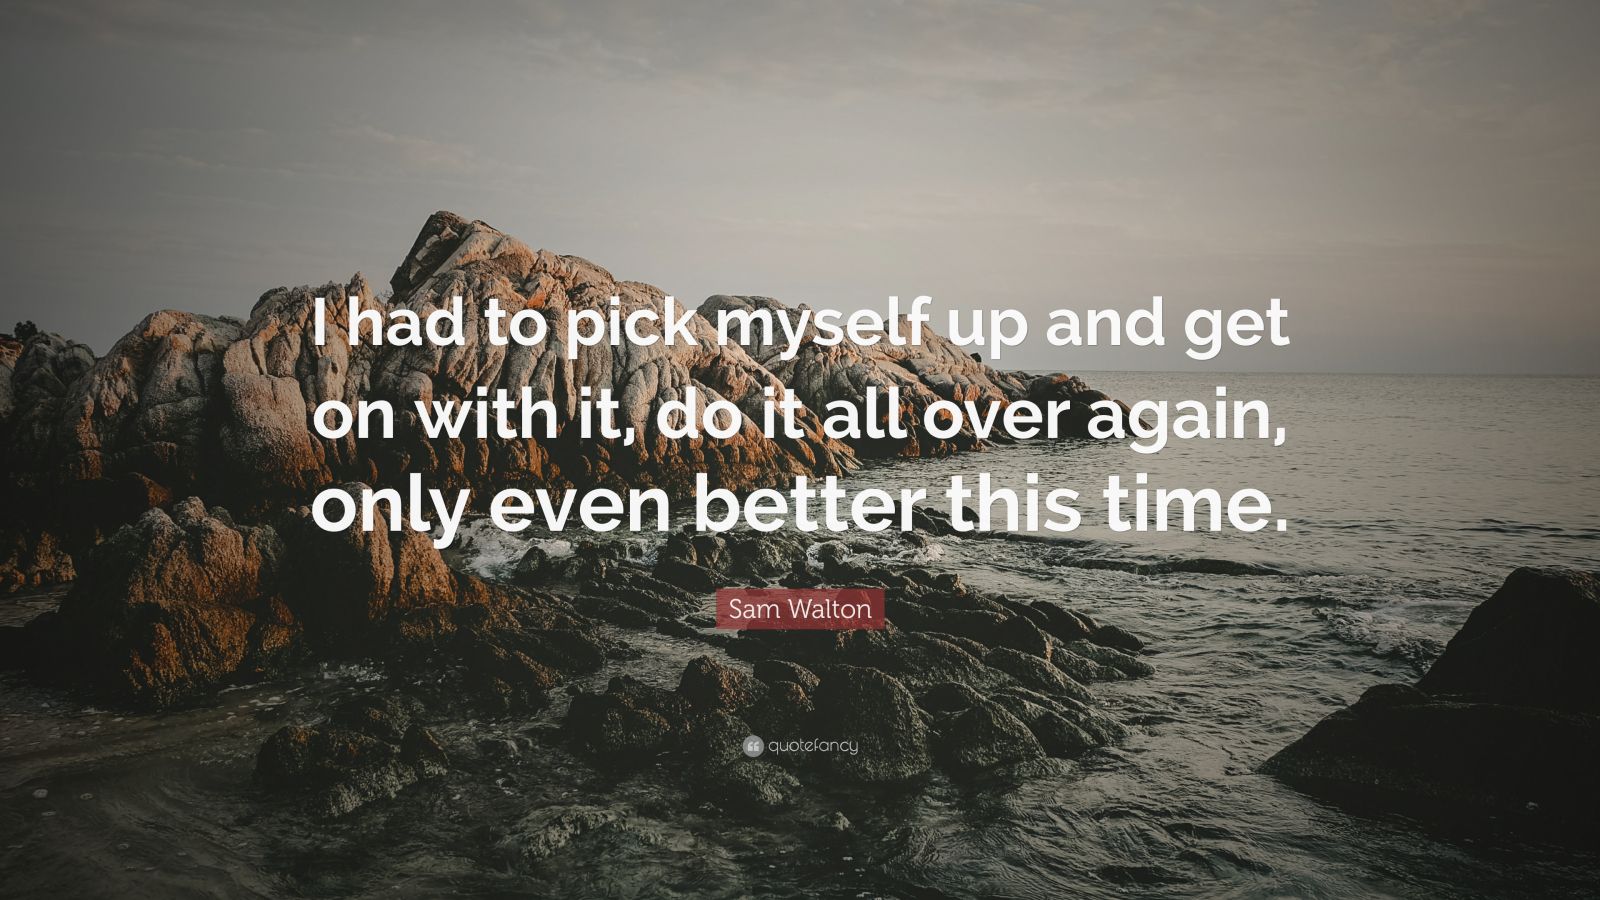 Sam Walton Quote: “I had to pick myself up and get on with it, do it ...